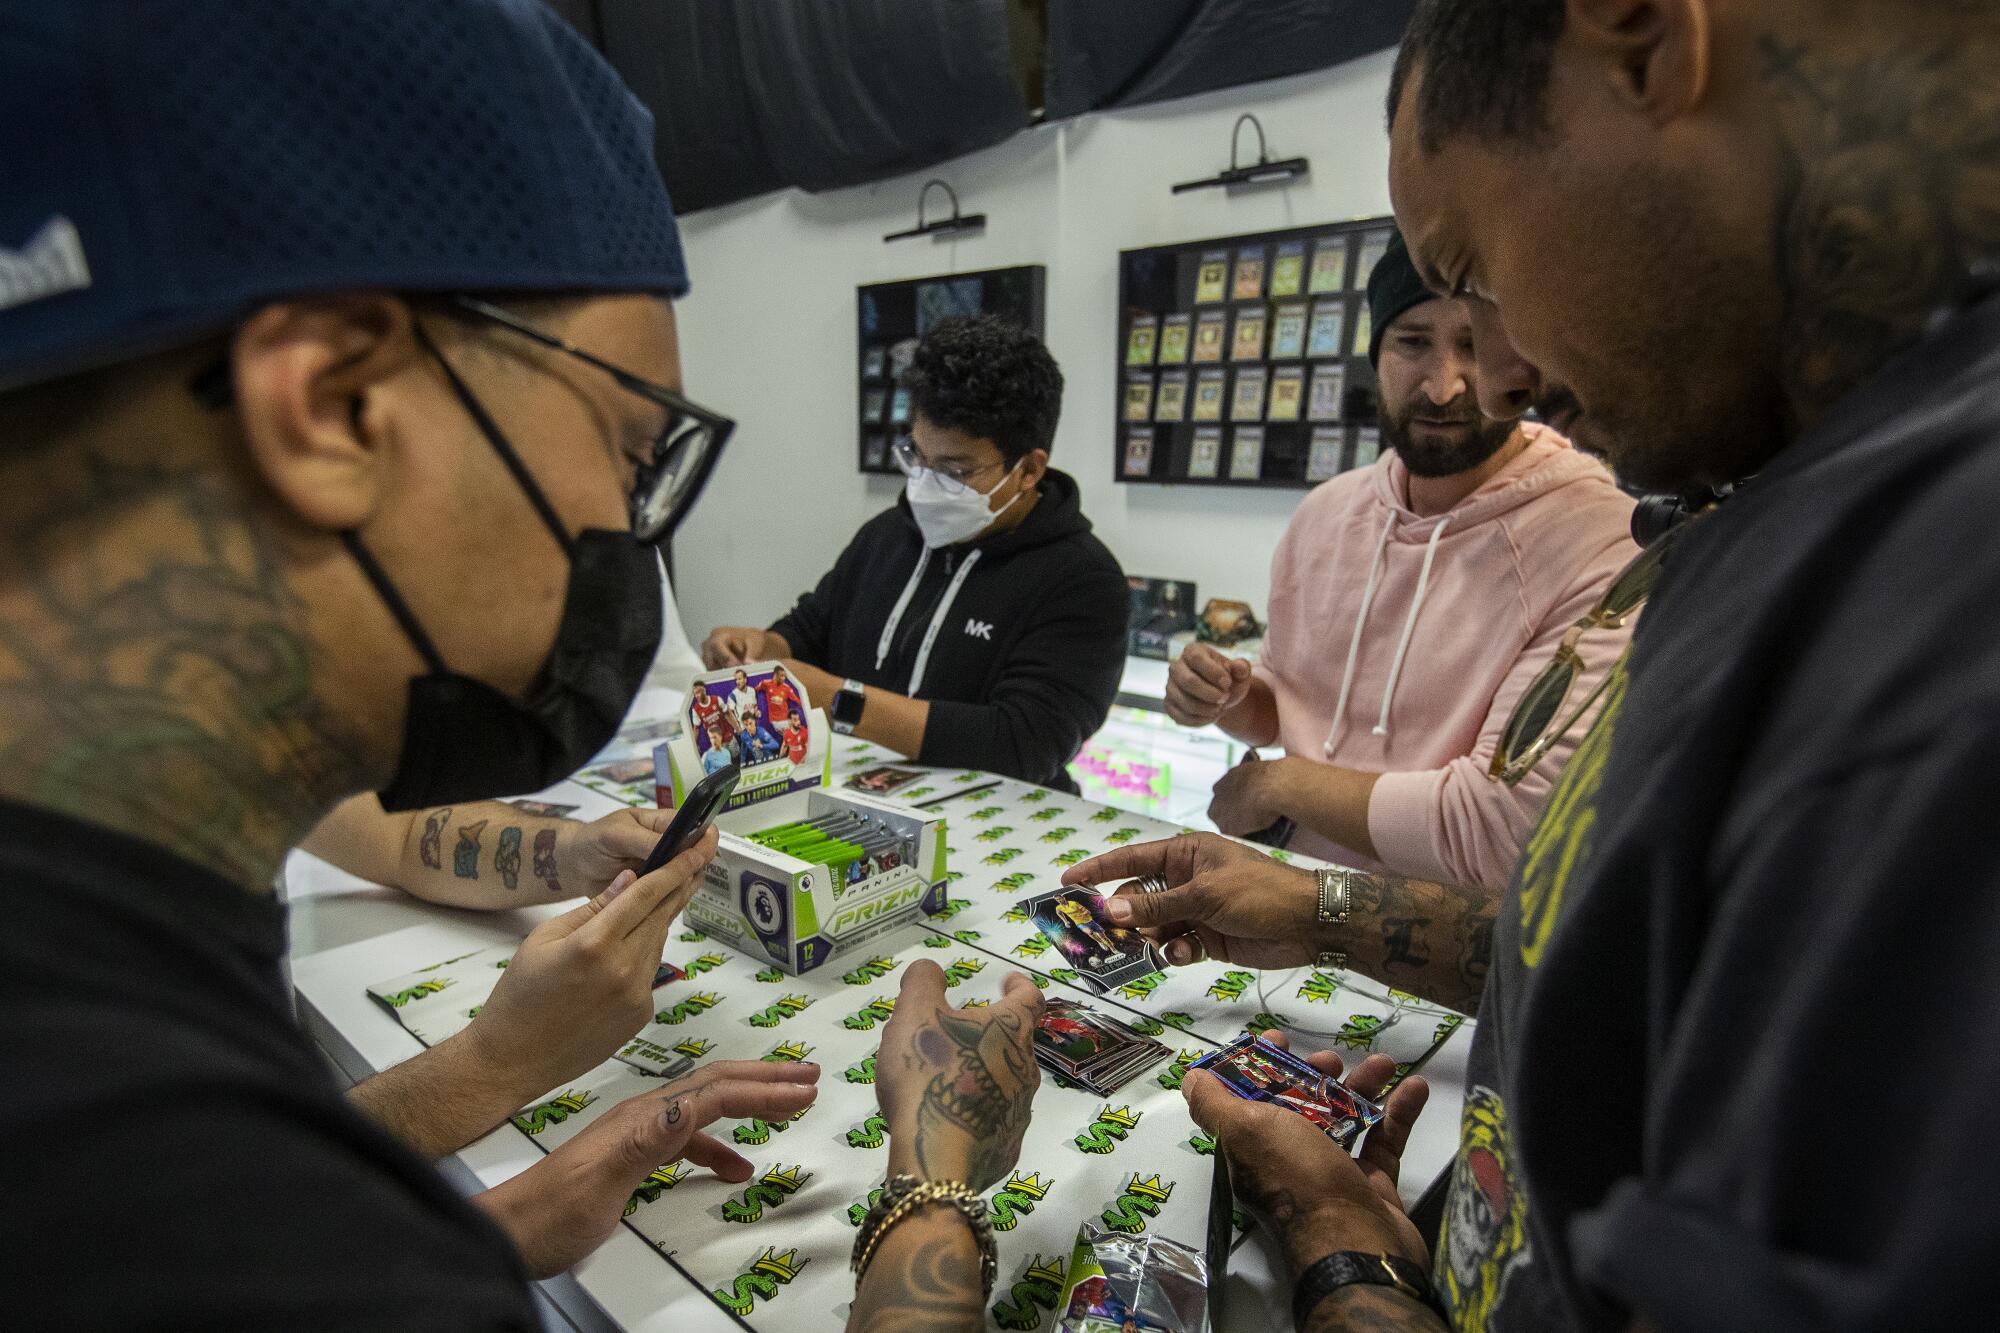 Shop manager and co-founder Chris Cyre, left, watches Jermaine Jones open up a pack of soccer cards.